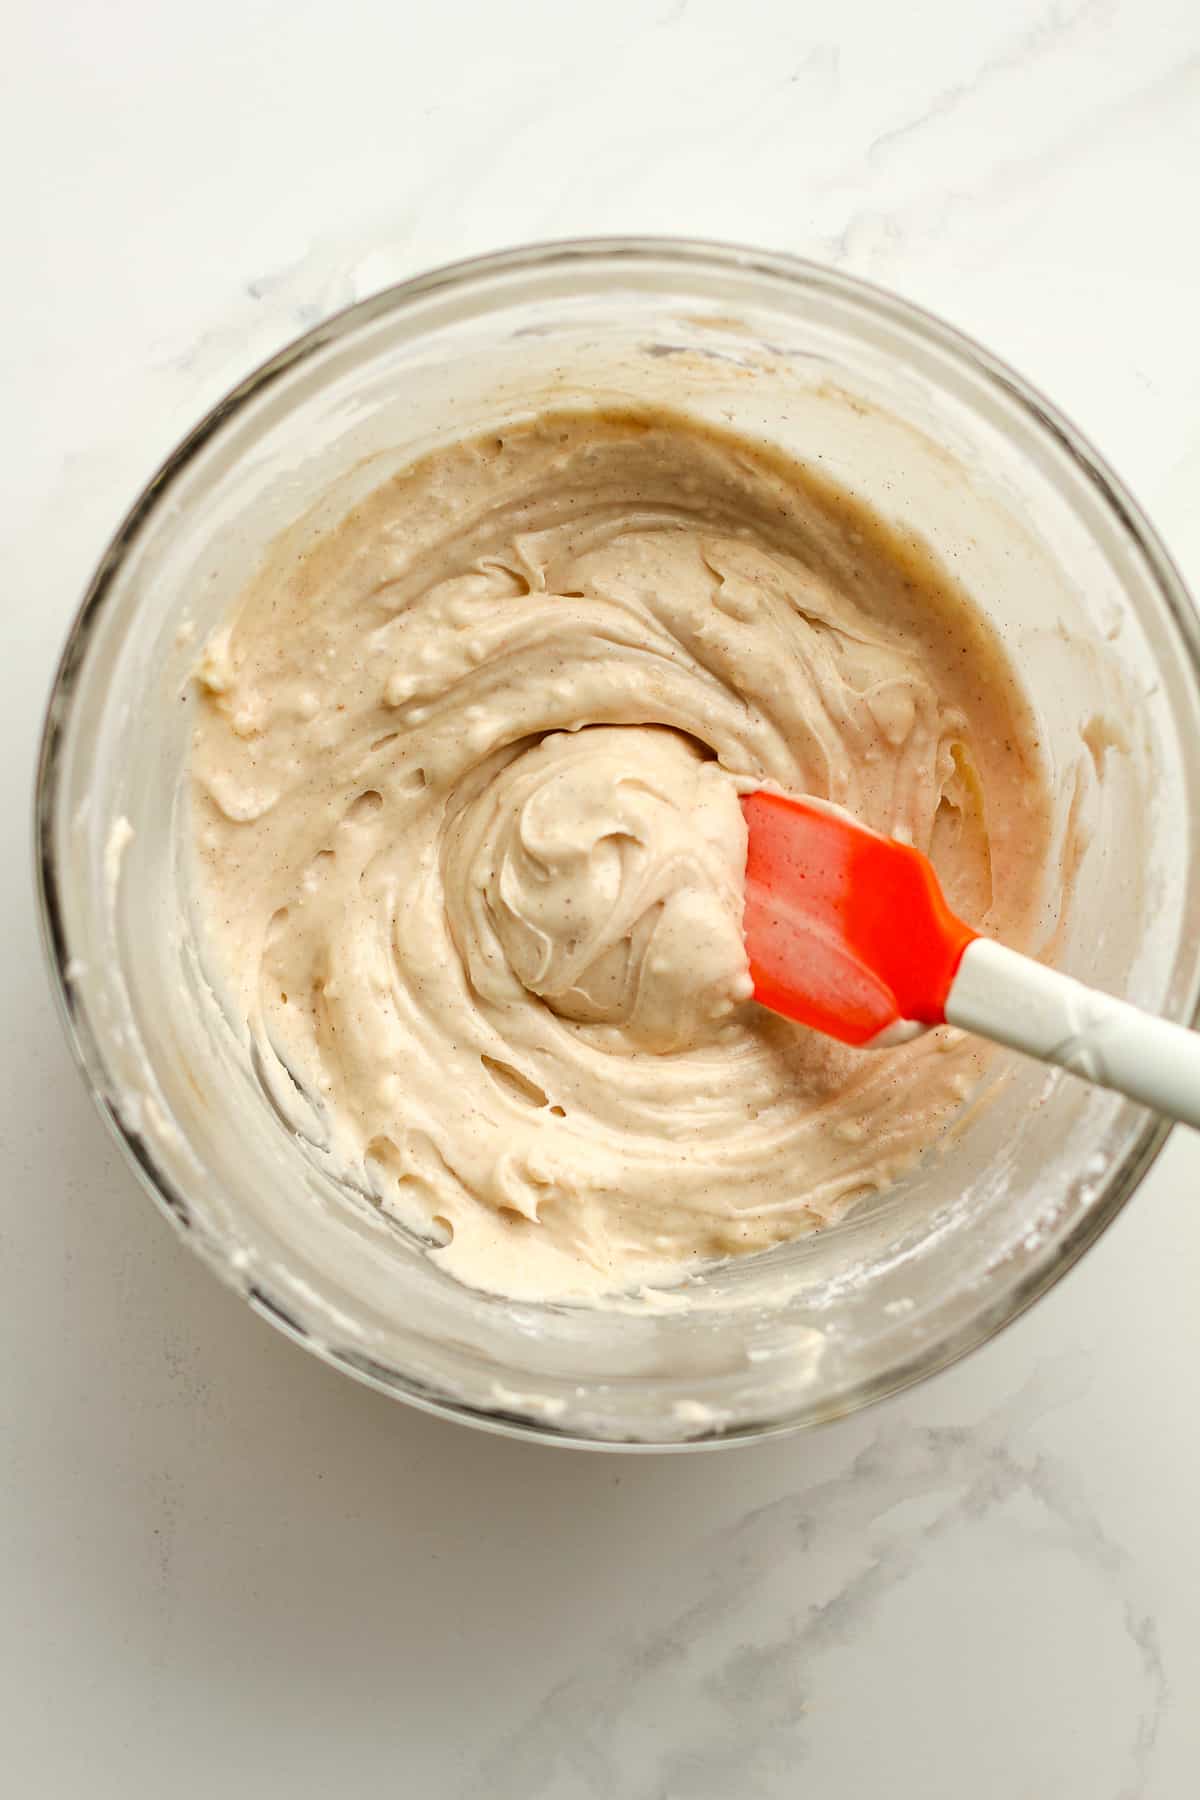 A bowl of cream cheese frosting.